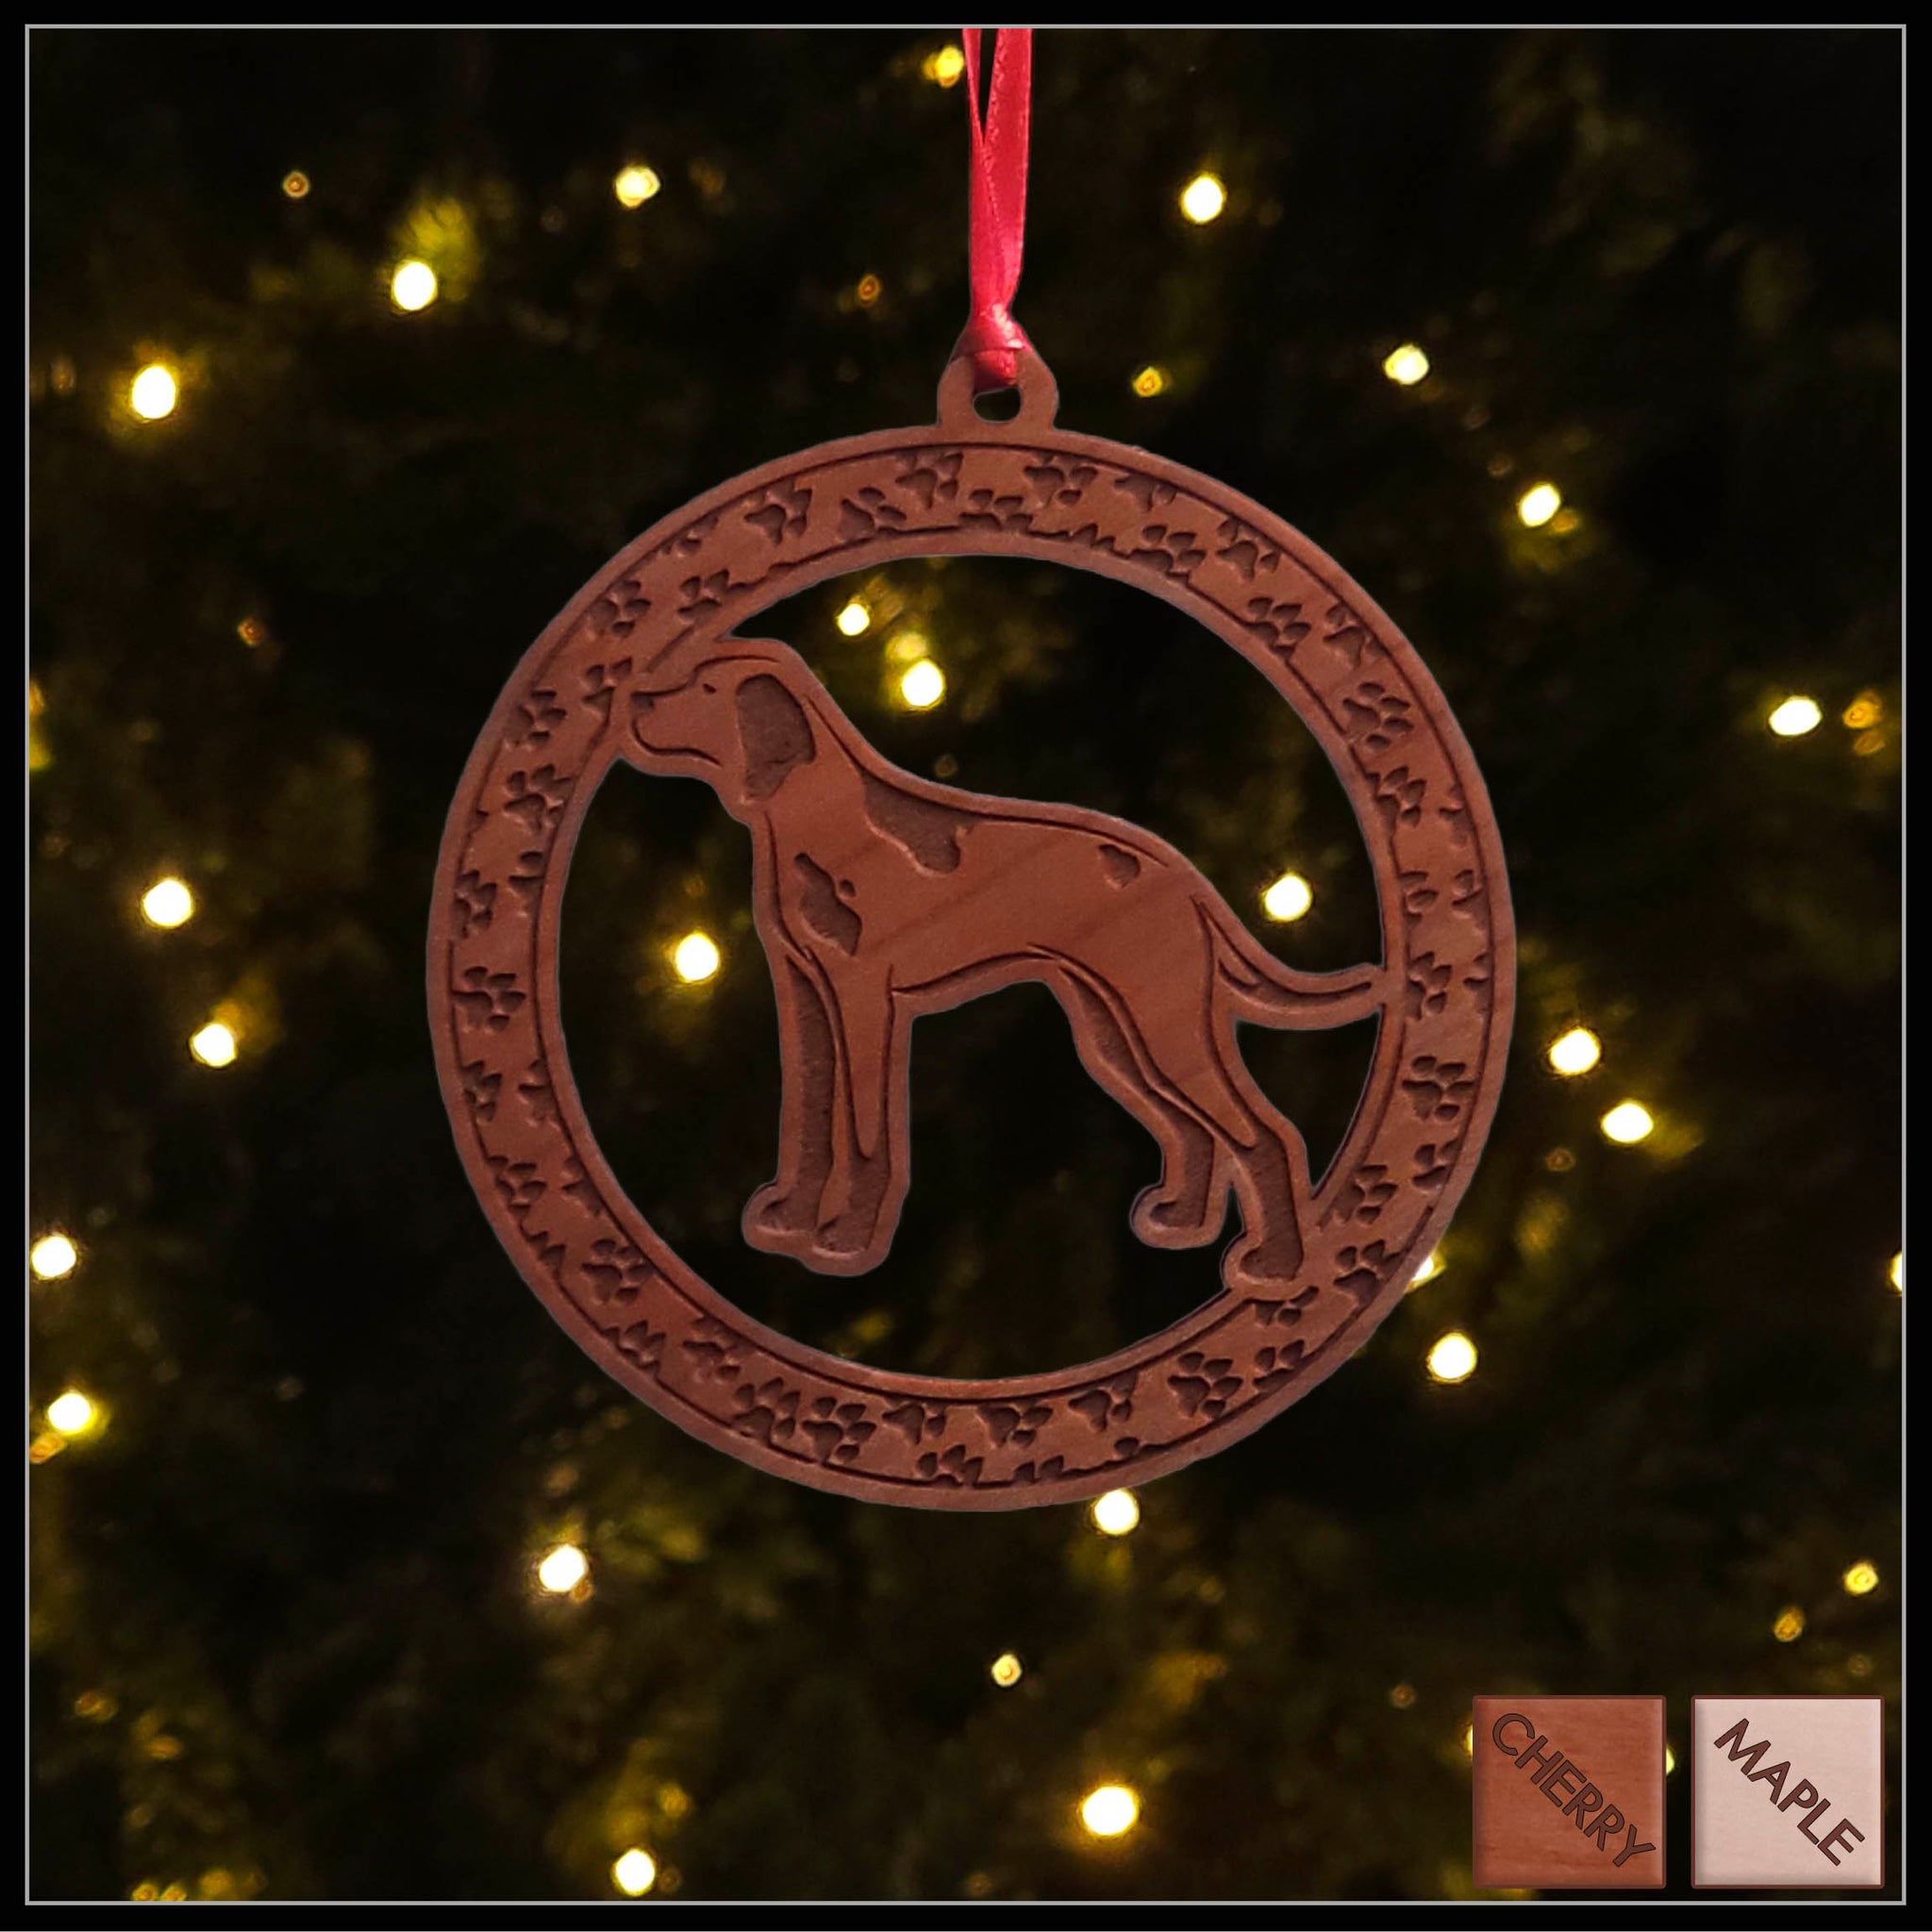 A round cherry wood veneer ornament with a border of small paw prints. The center of the ornament is a English Pointer dog.